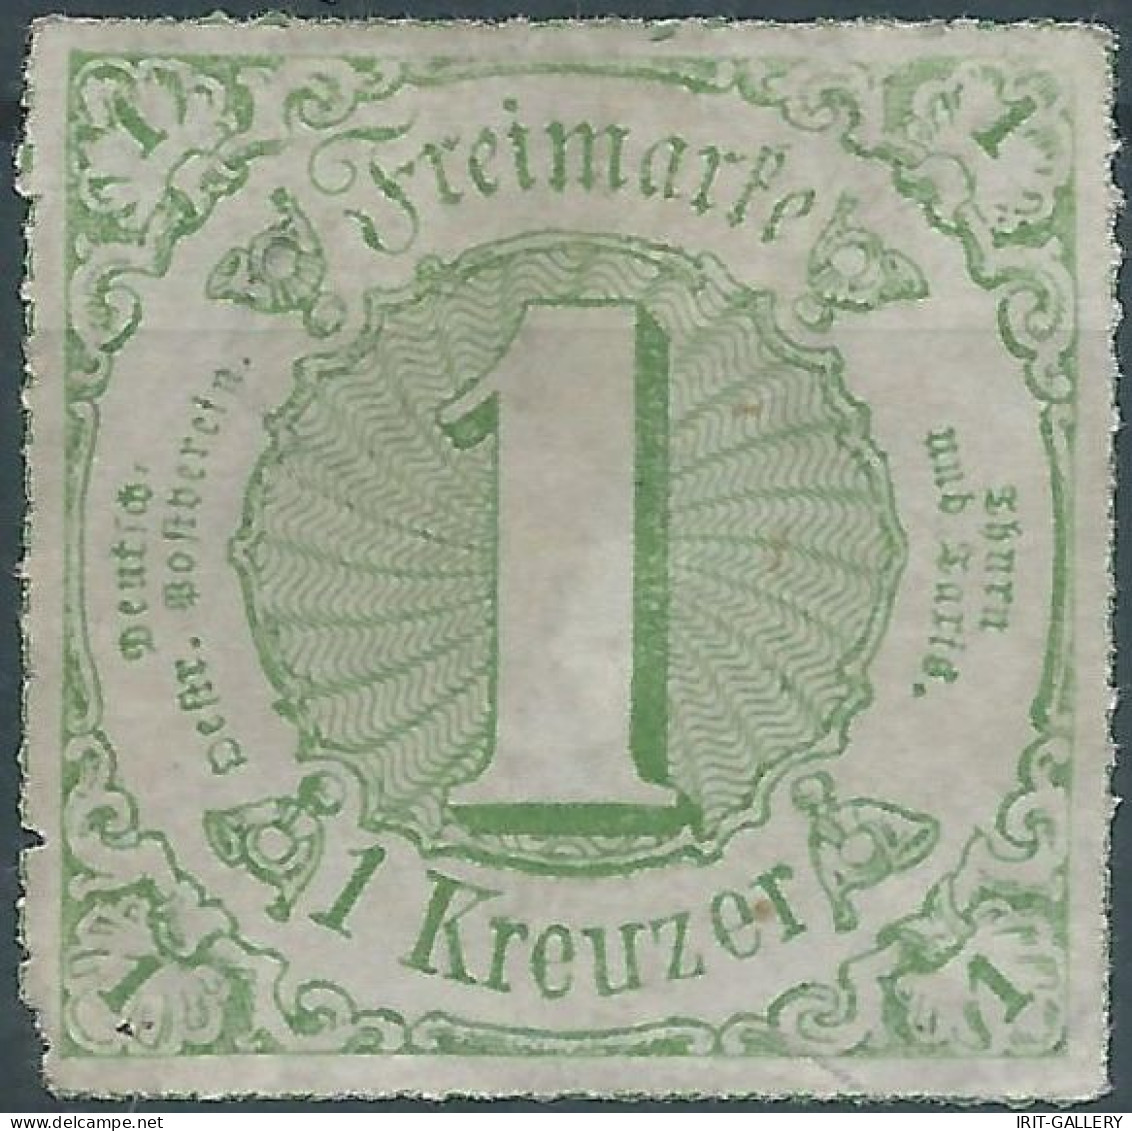 Germania-Germany-Deutschland,Taxis,1865 Colored Print On White Paper-Rouletted Perforation, 1Kr,Mint,Value:€15,00 - Nuovi